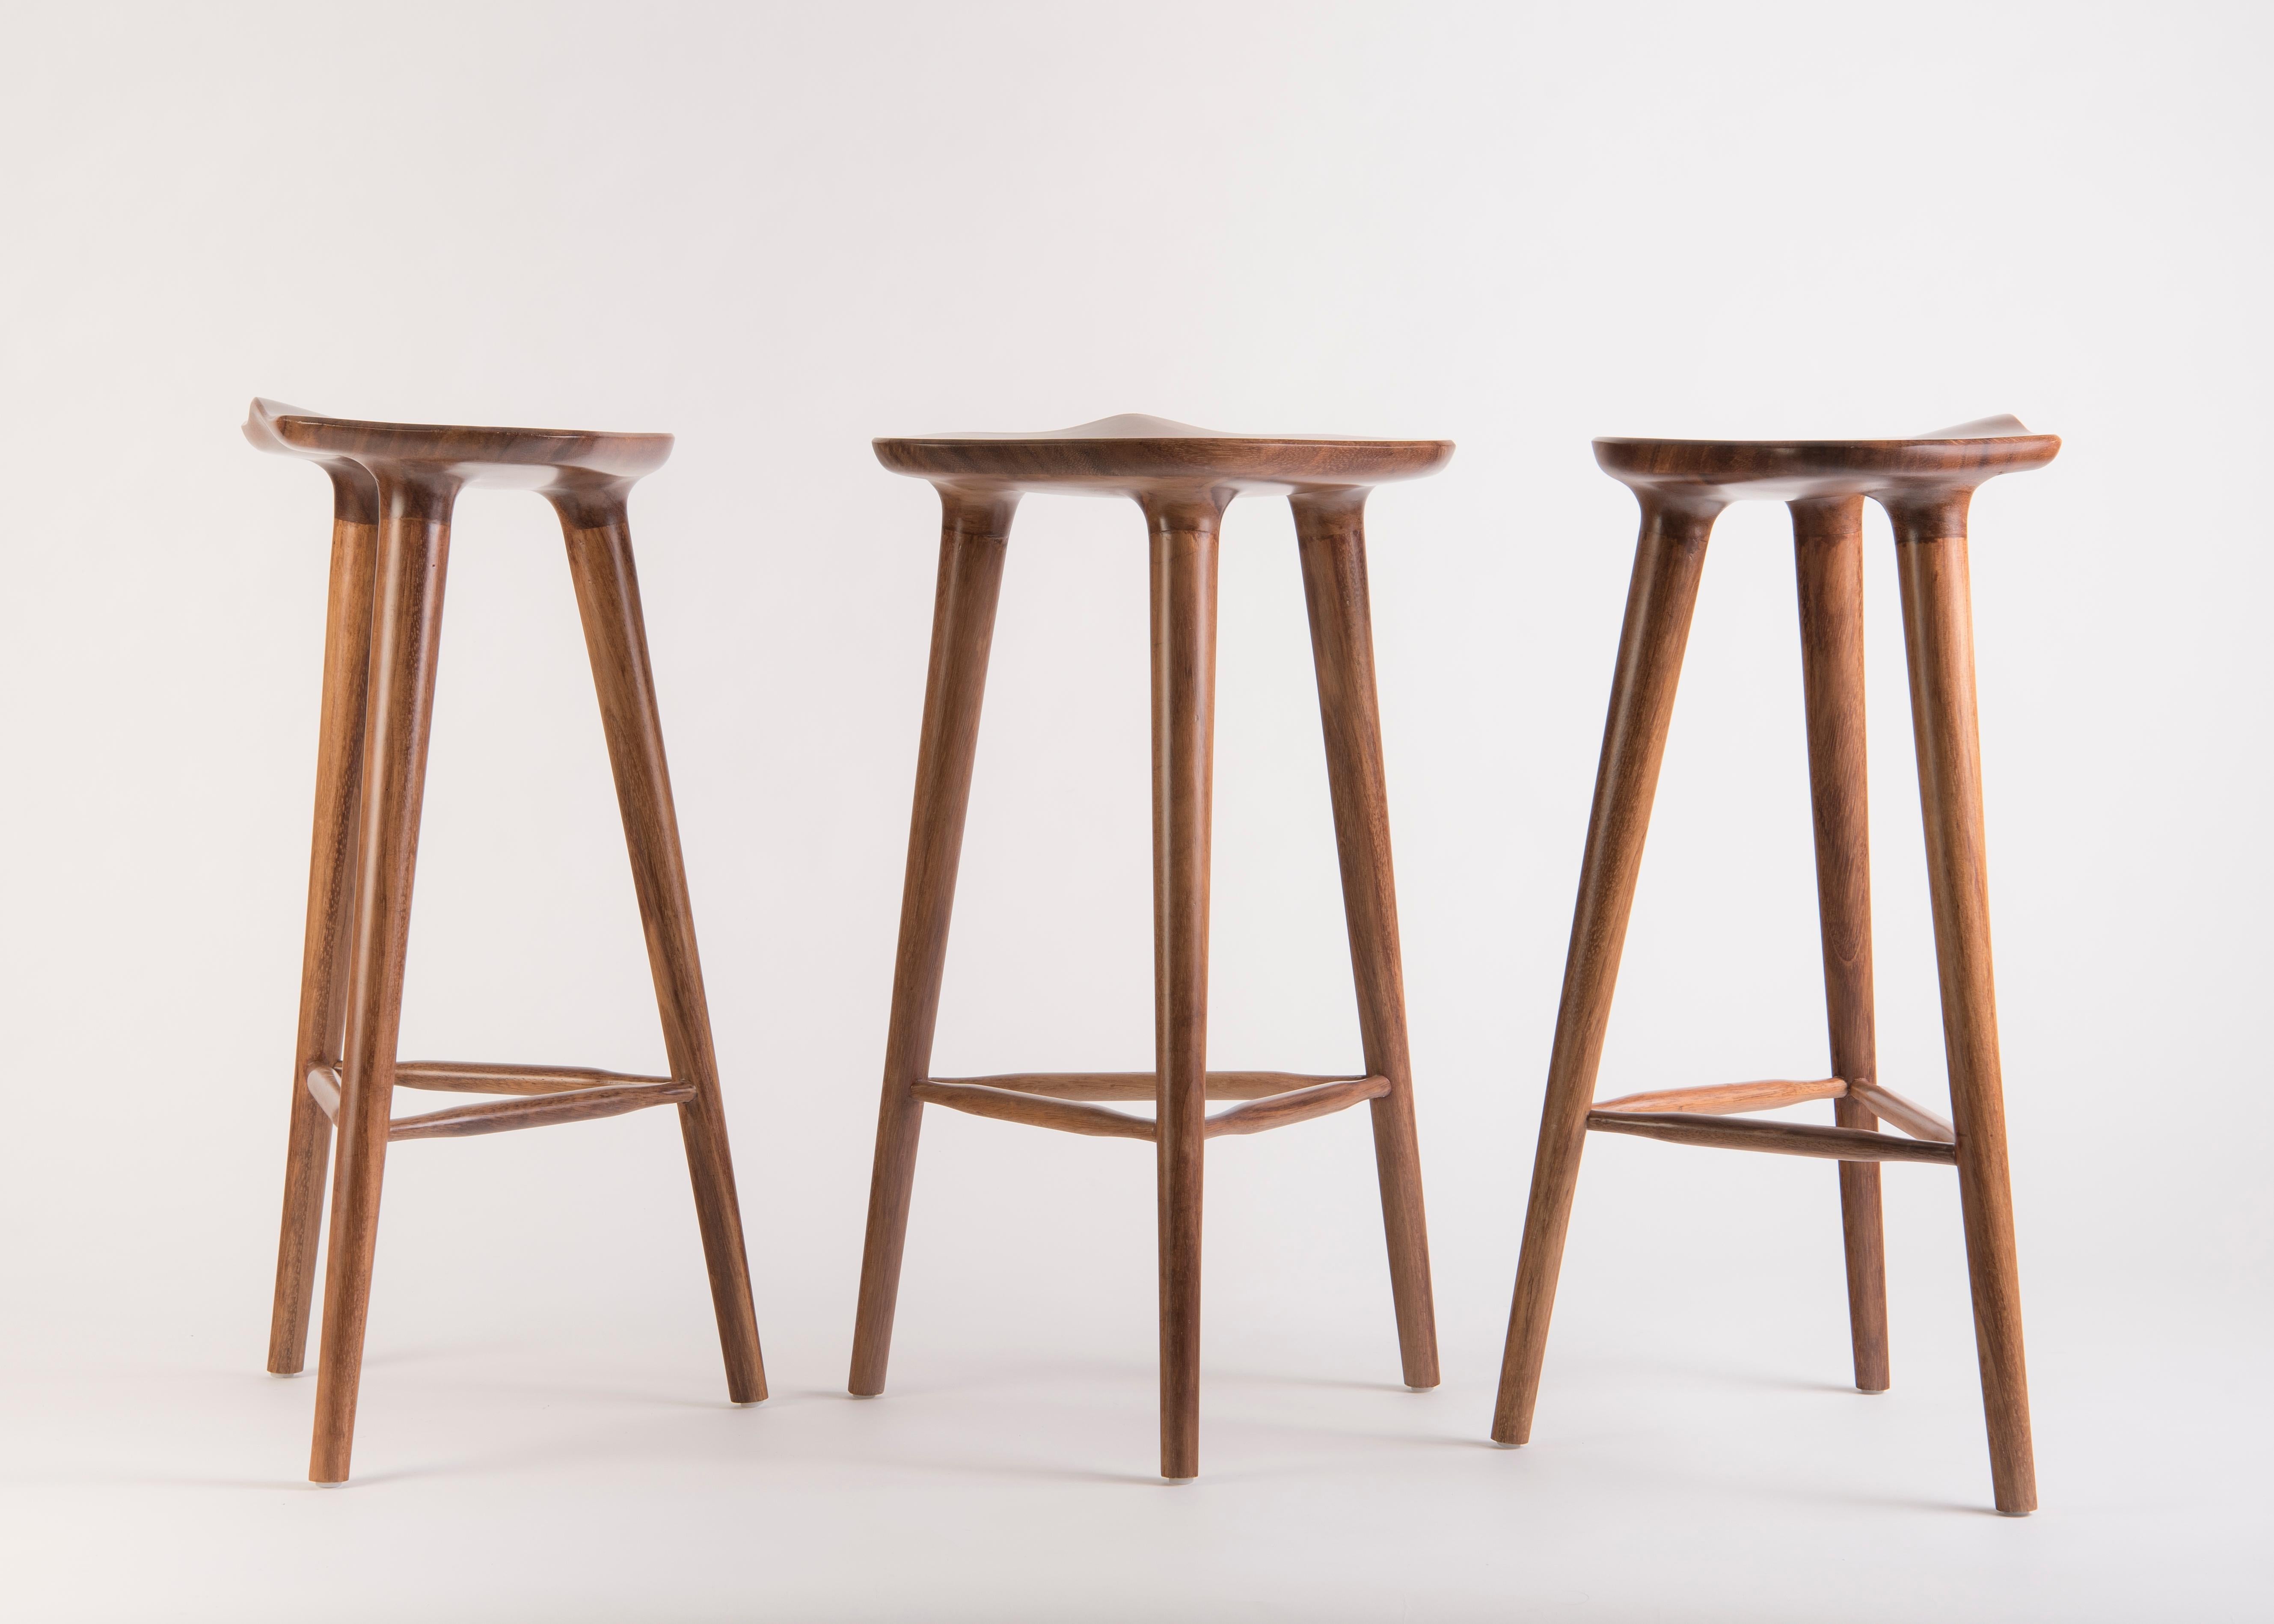 Descendants of an extraordinary family, TAM stools are grown to 65 cm in height, multiplying in a garden of possibilities while preserving in their genetic makeup the beauty of tzalam wood. Its radiant design has become an icon in kitchens,